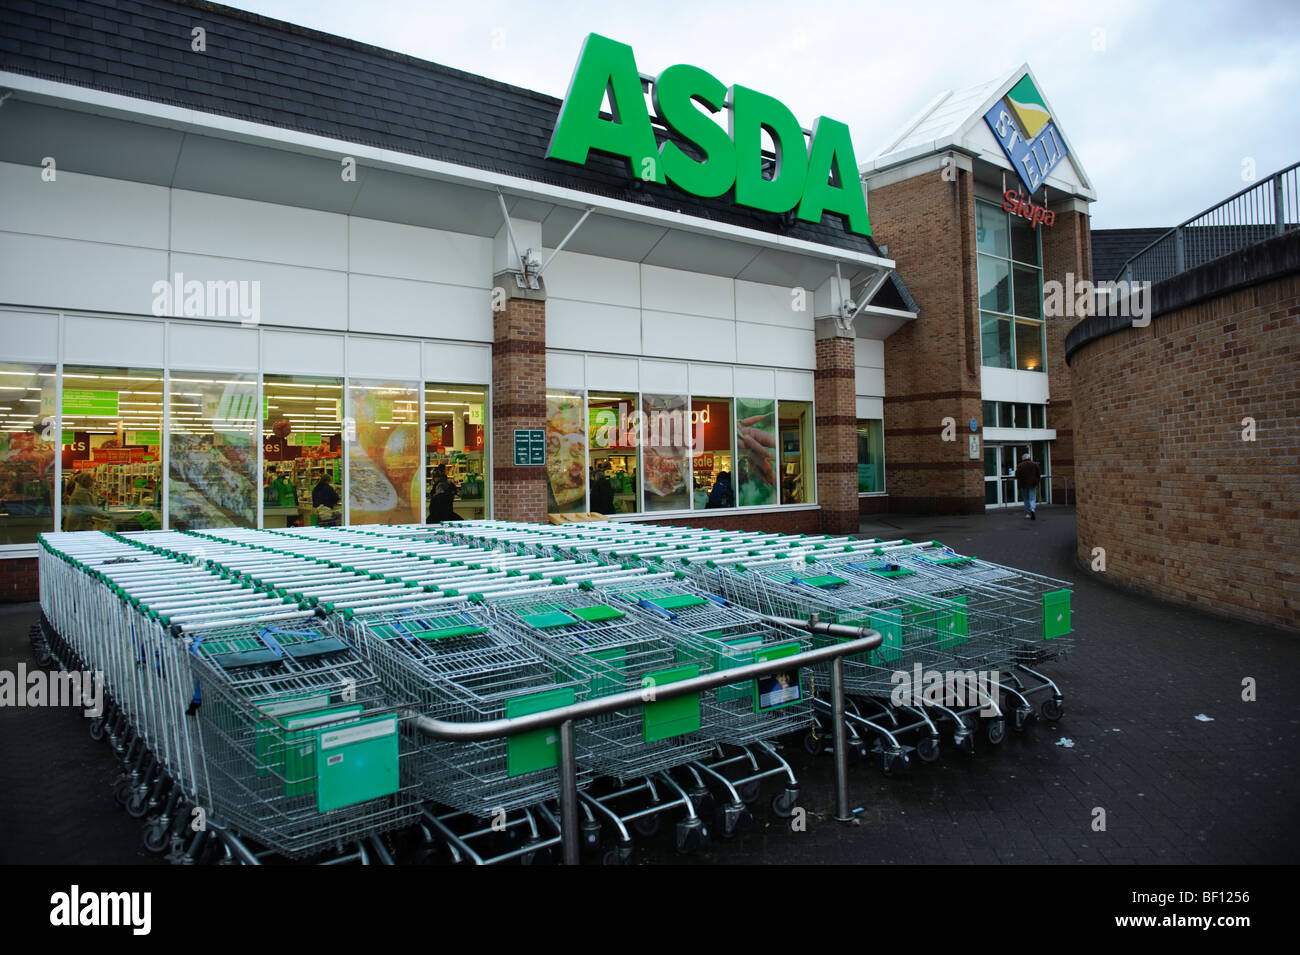 Asda supermarket in Llanelli town centre, Carmarthenshire west wales UK Stock Photo